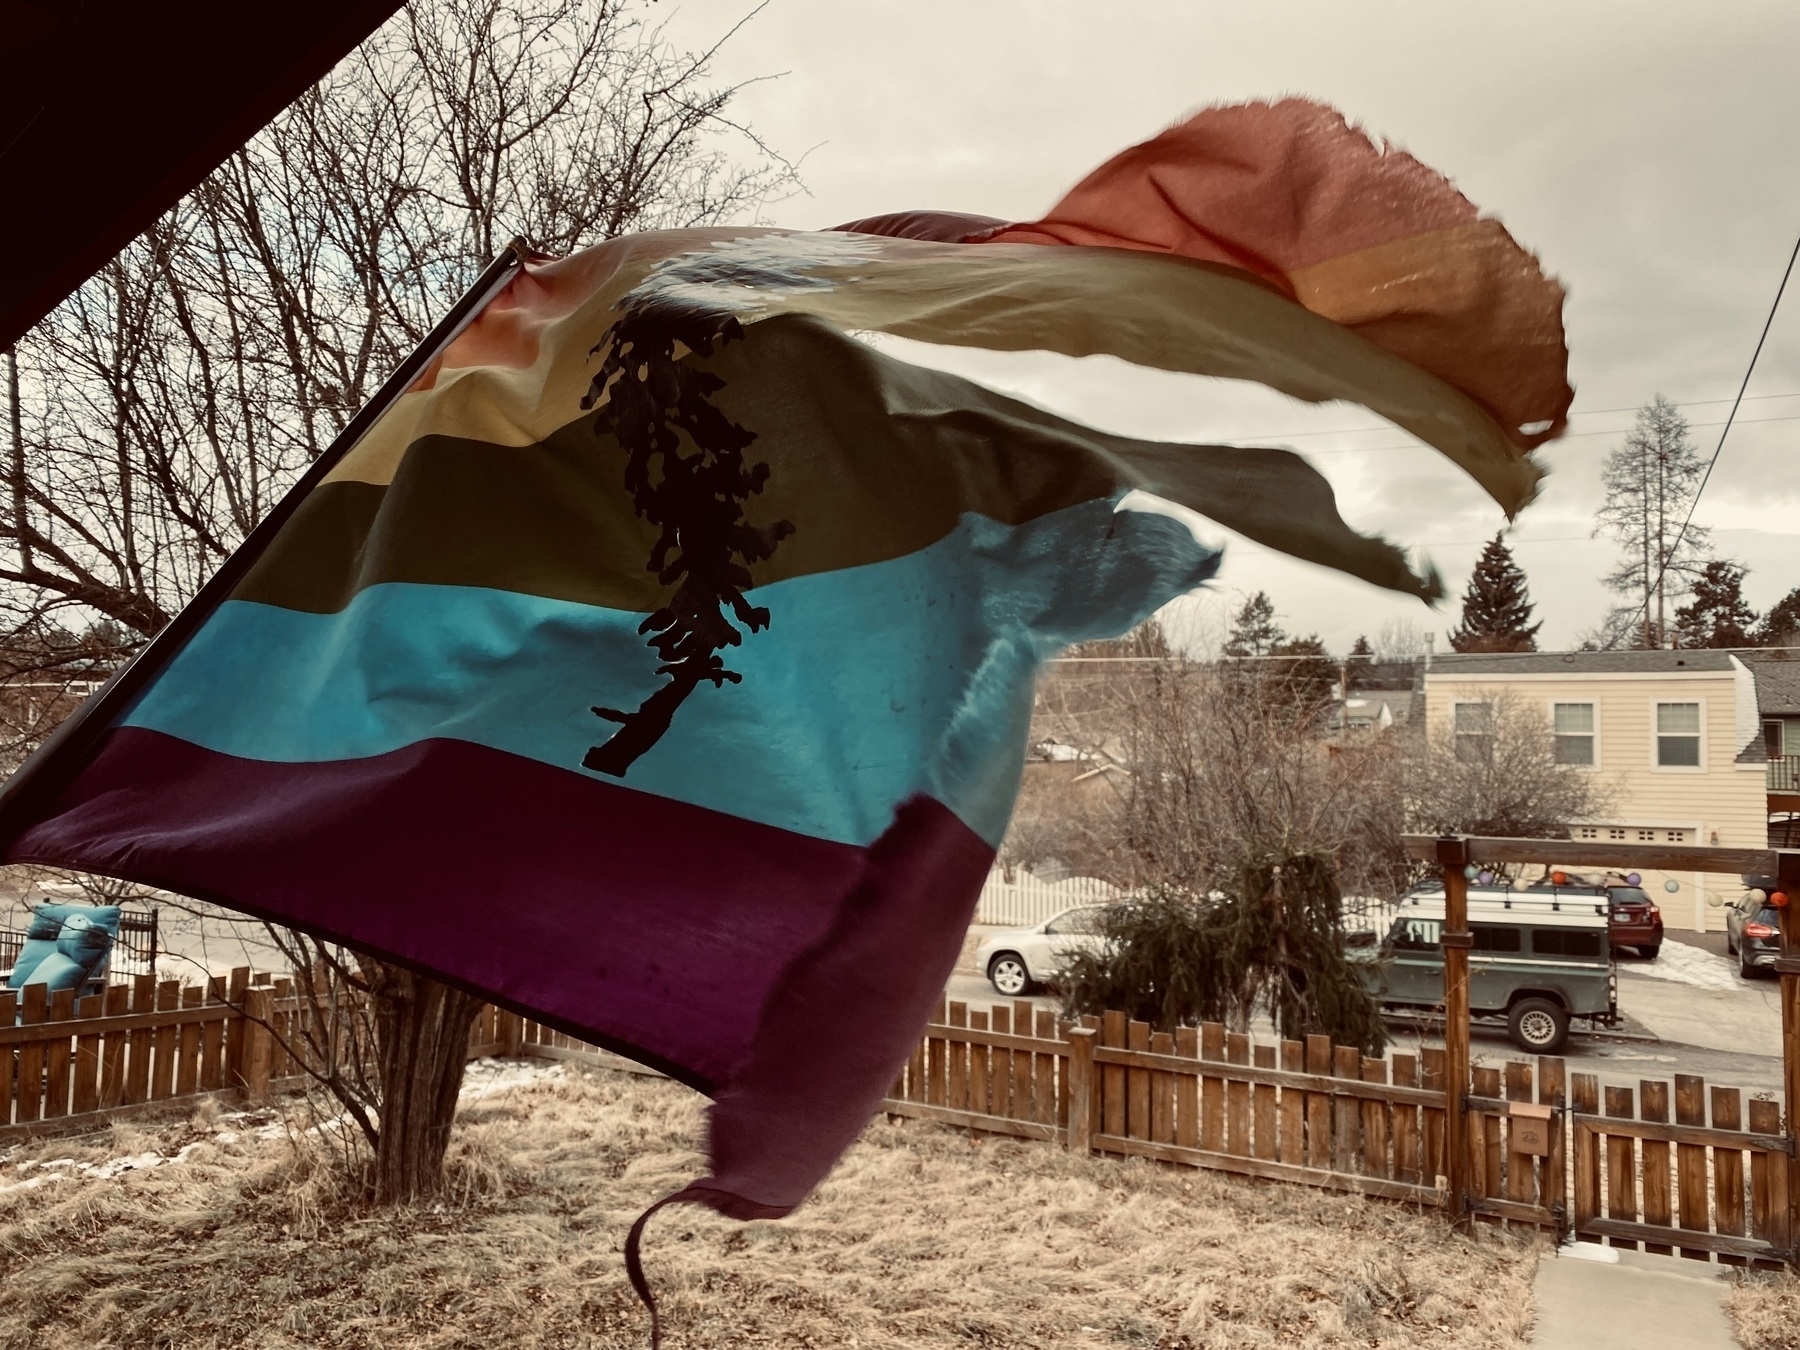 Tattered Pacific Northwest pride flag flapping dramatically in the wind. The flag is on a front porch overlooking a front lawn with a small wooden picket fence. 